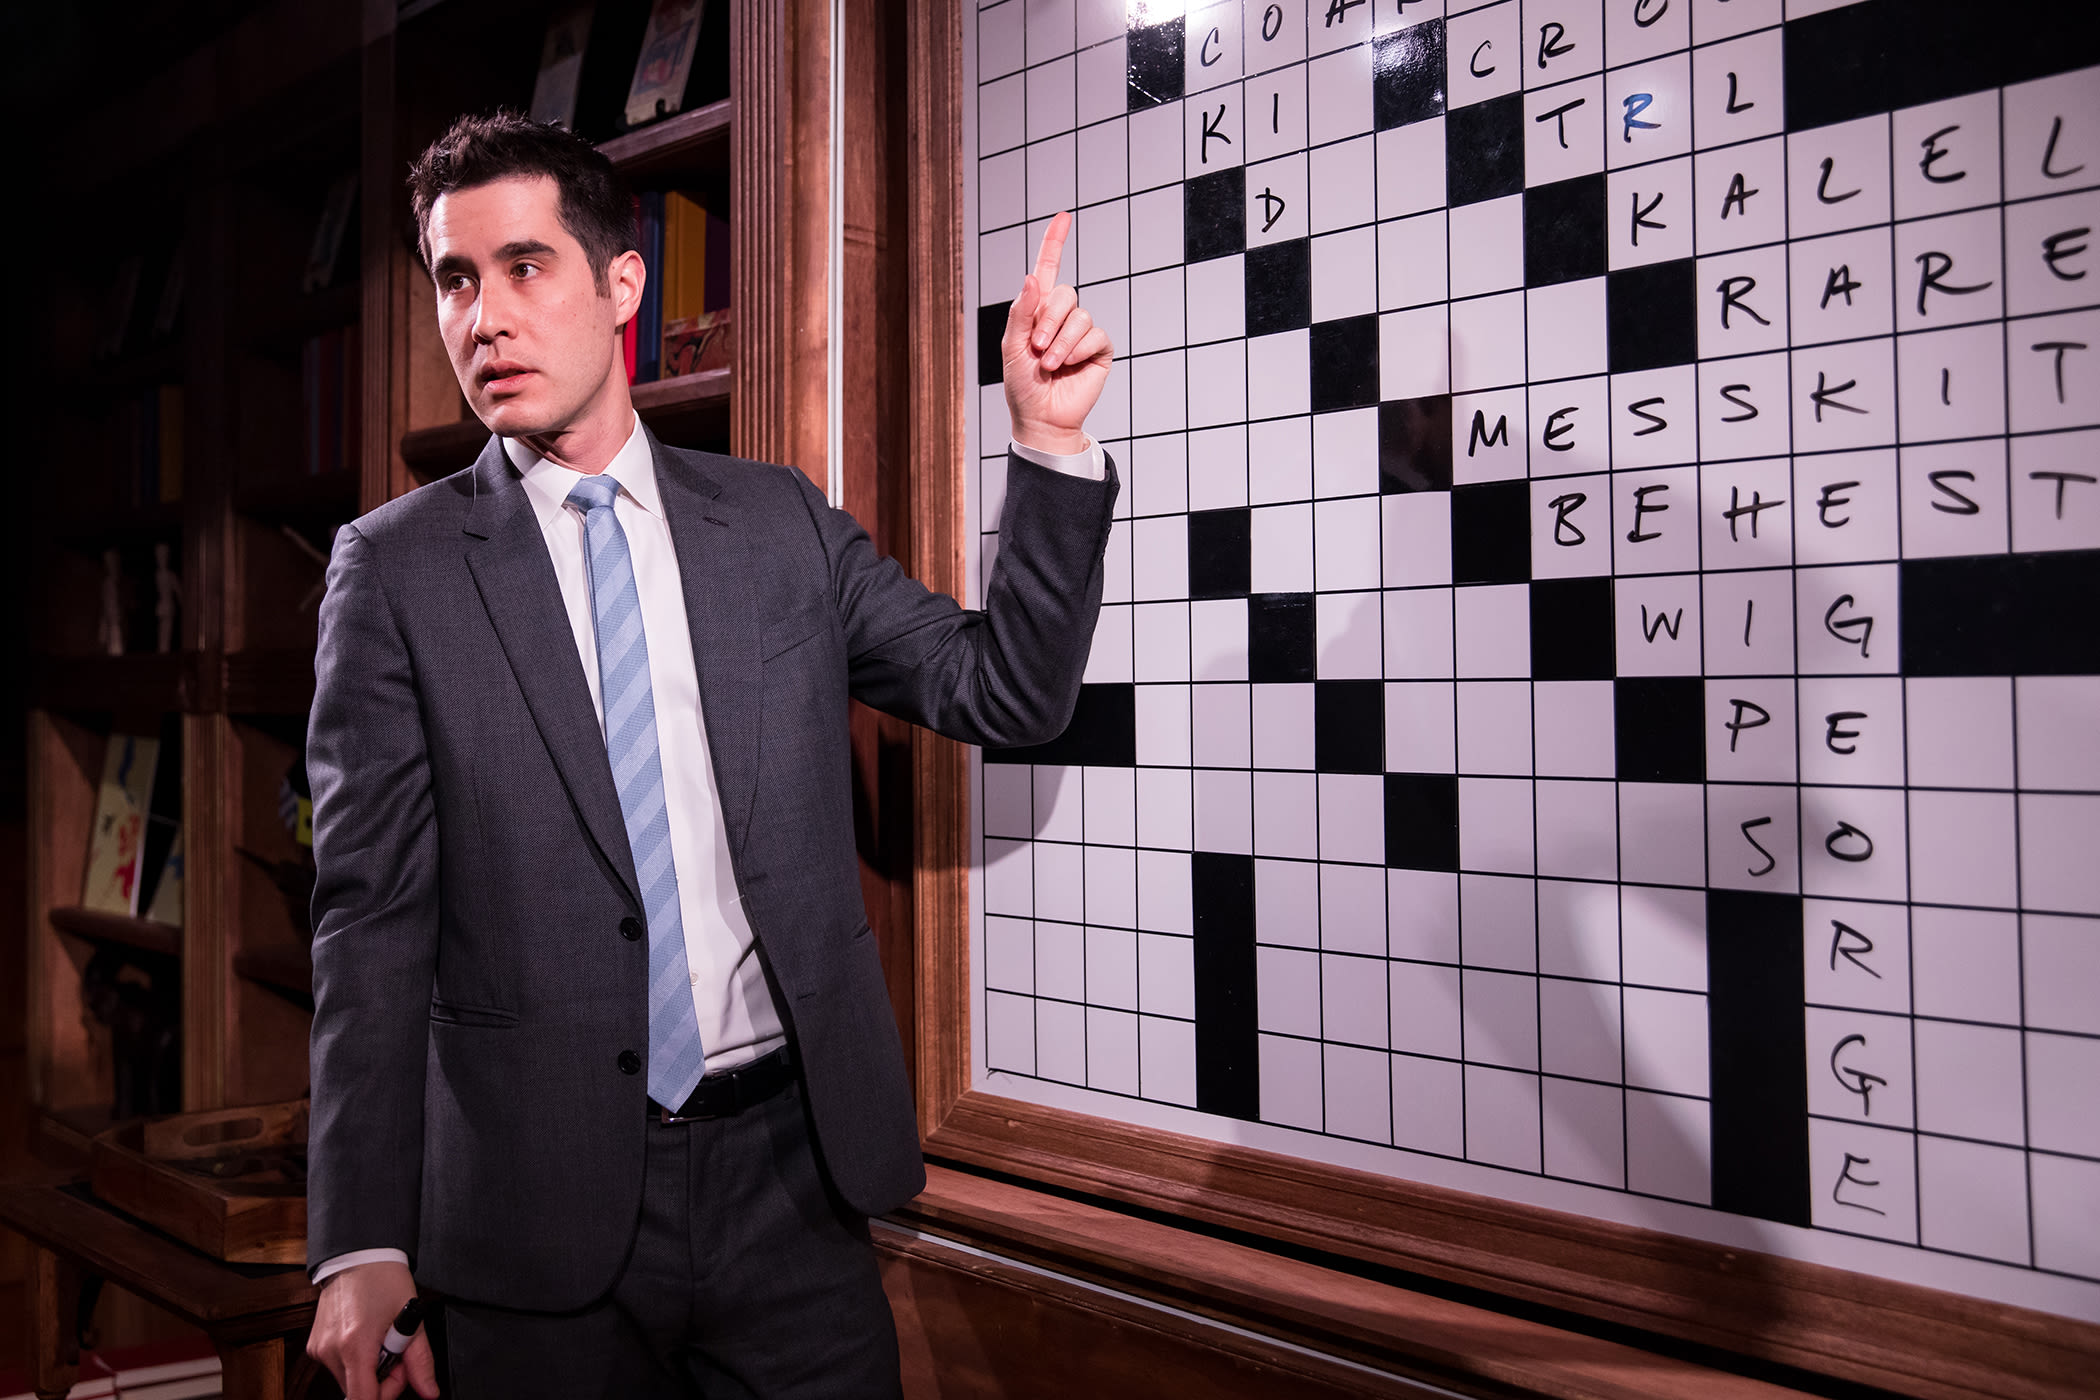 More fun than Wordle: A new Chicago show draws from magic, puzzles and escape rooms